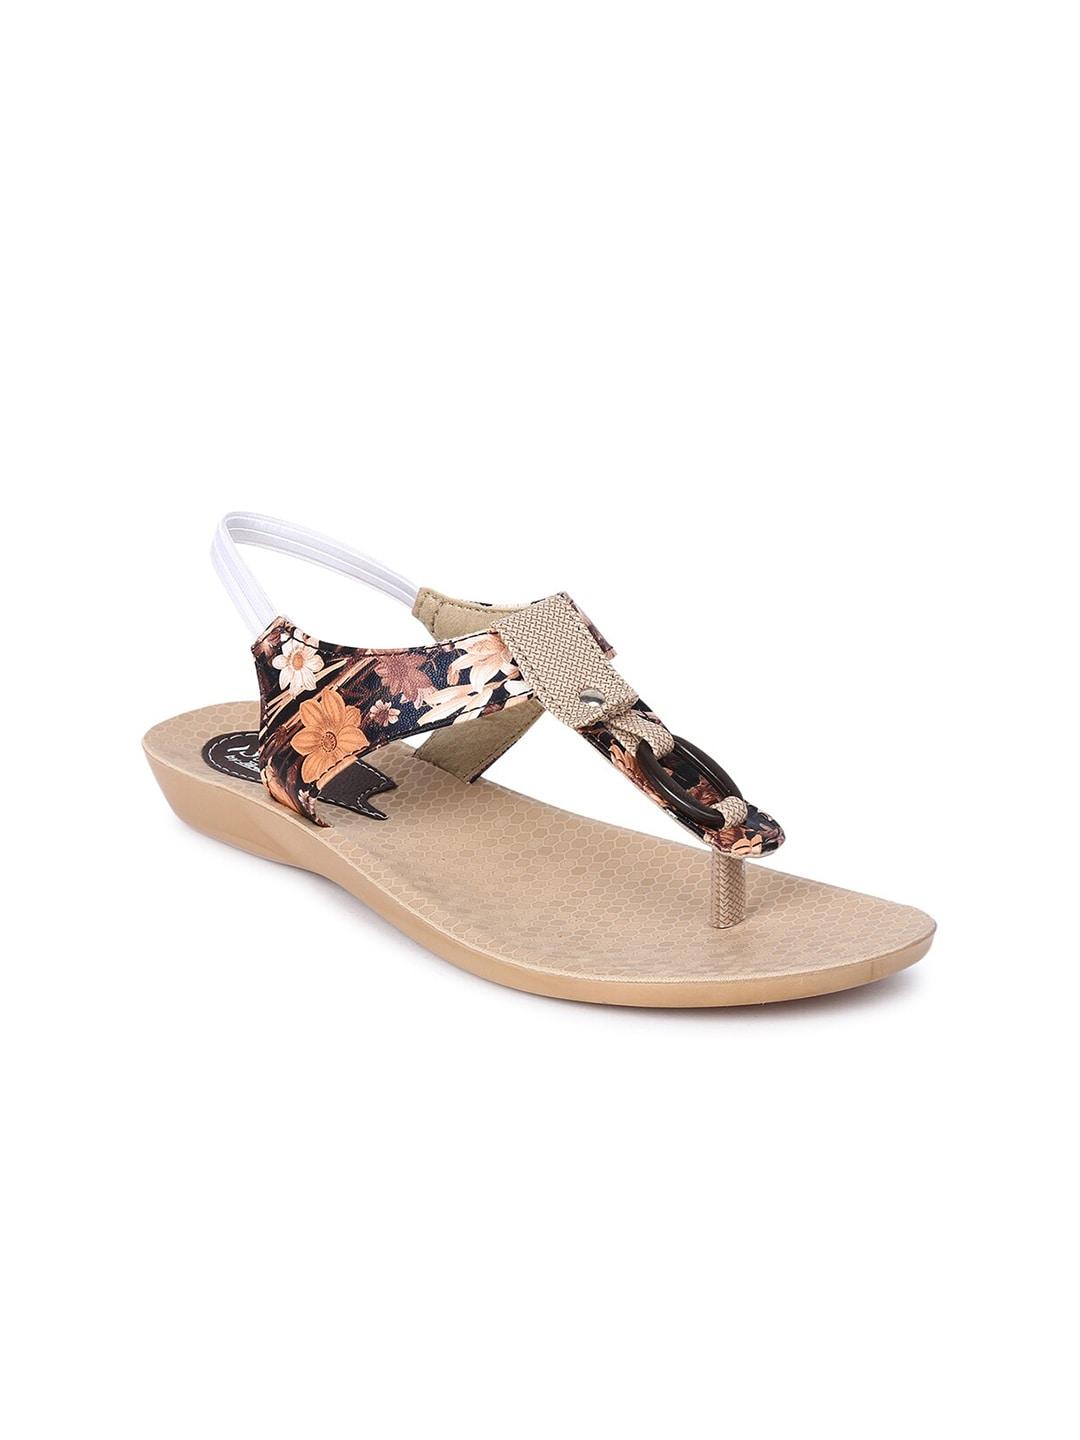 Paragon Women Brown & Beige Floral Printed Flats